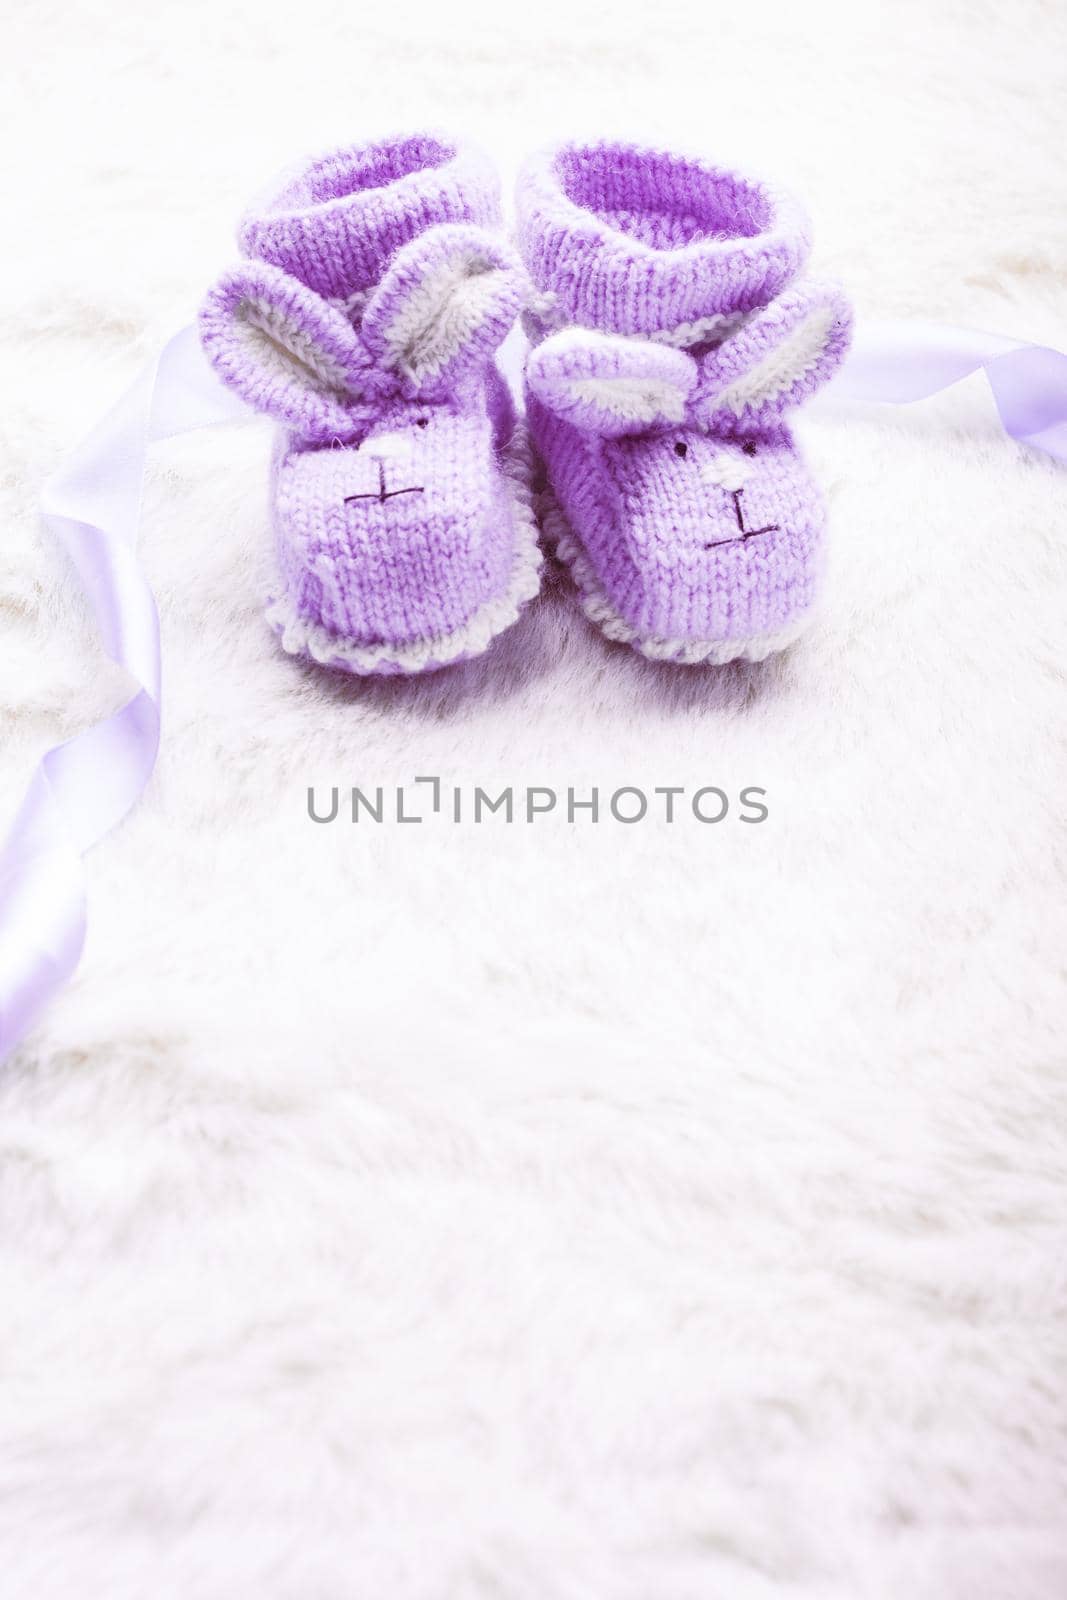 Knitted purple baby booties with rabbit muzzle over fur